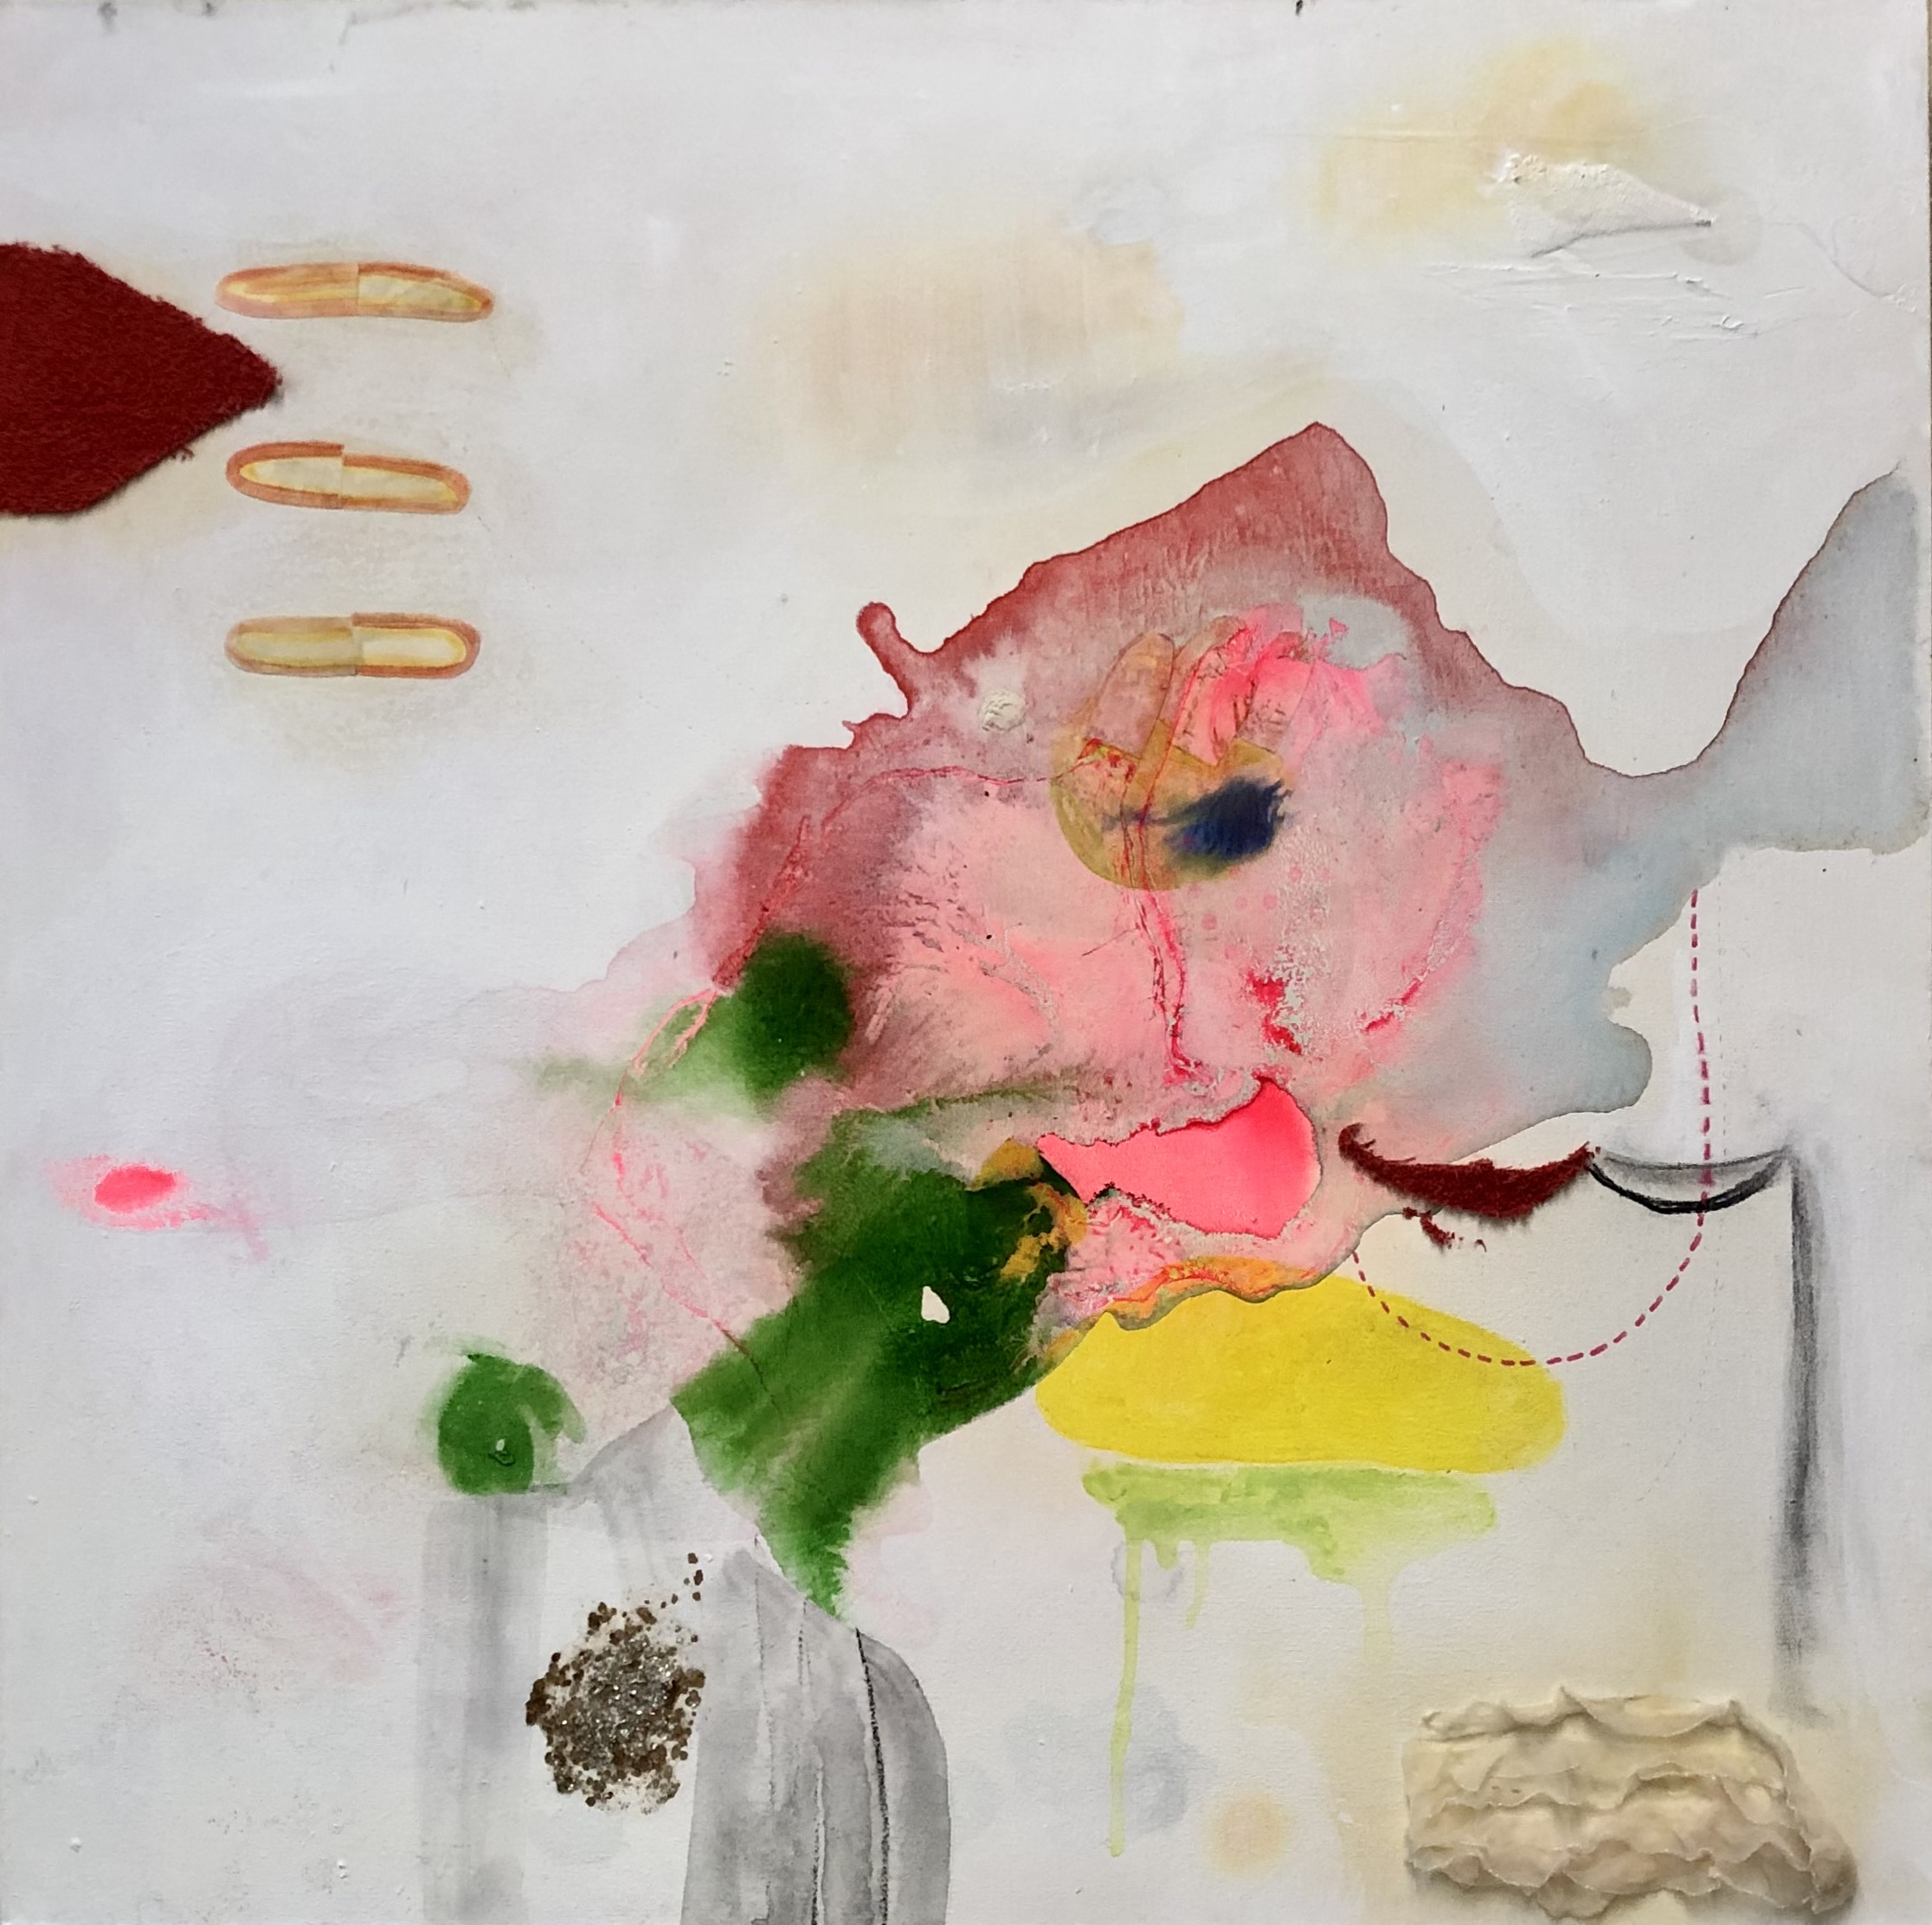 Abstract mixed media collage on canvas. The main part of the composition is in the center and includes paint, cloth, and tool. The center of the composition is pink, white, and green.